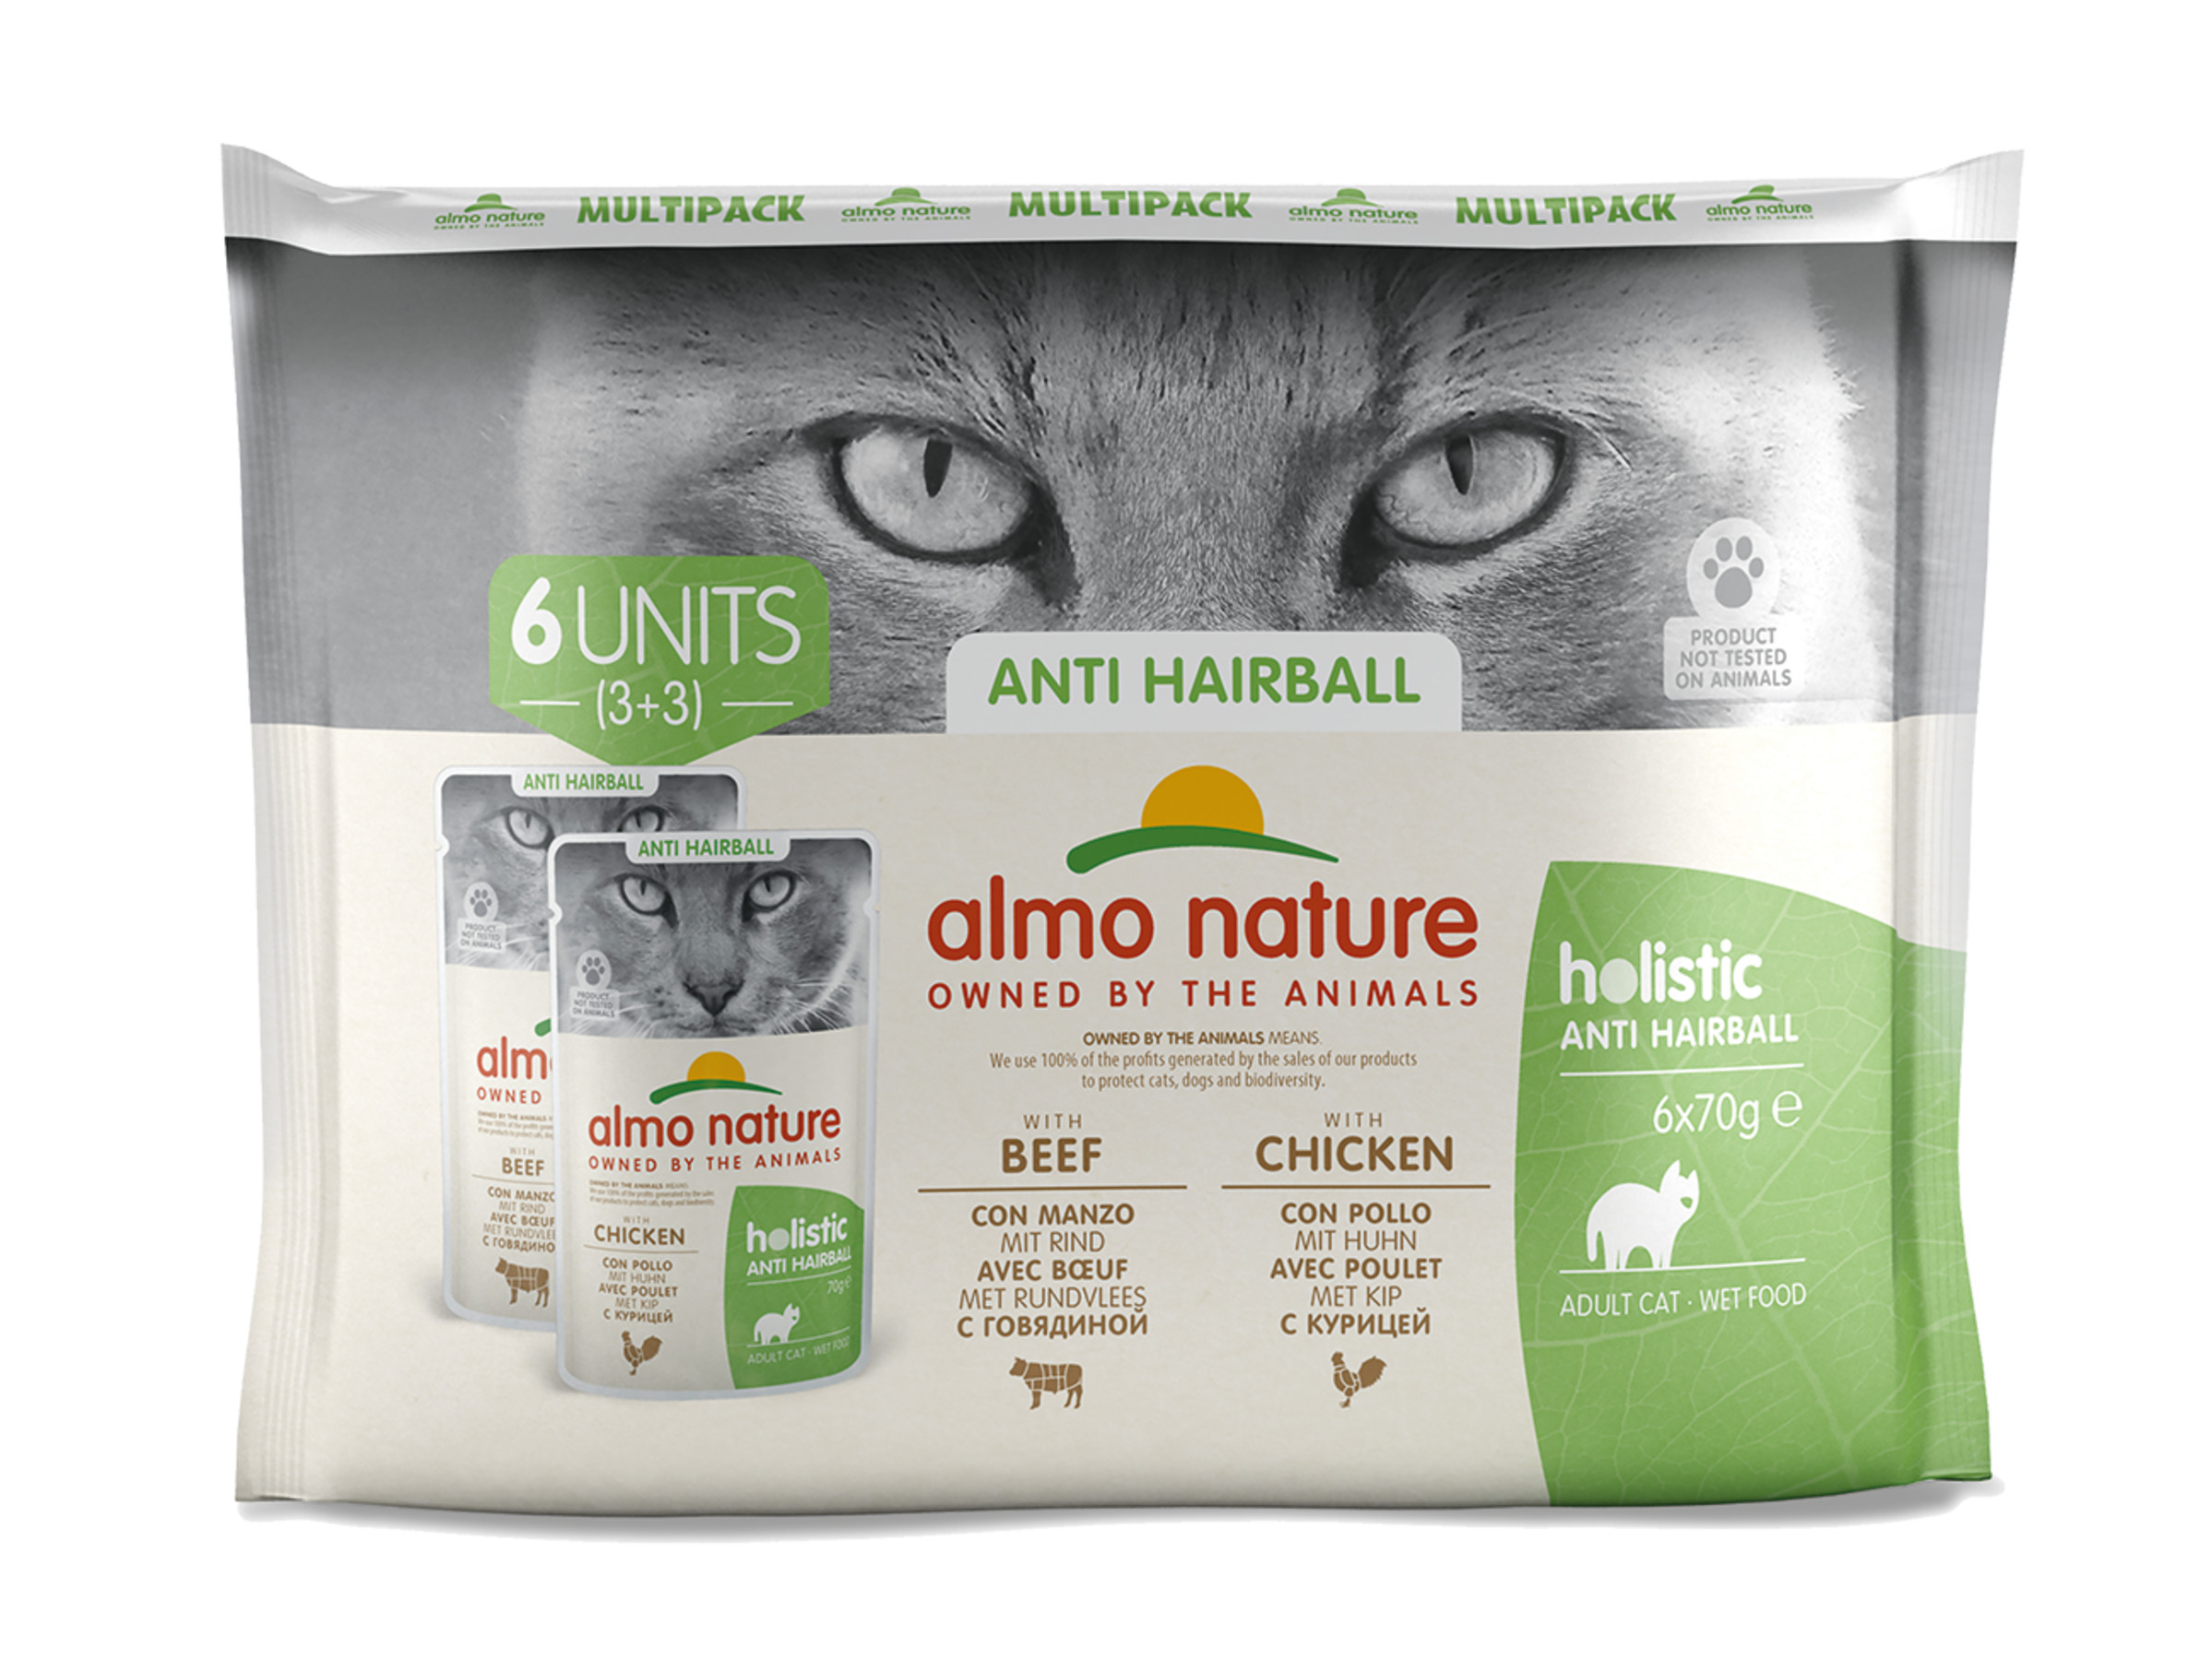 Almo Nature Multipack Anti-hairball- Beef & Chicken